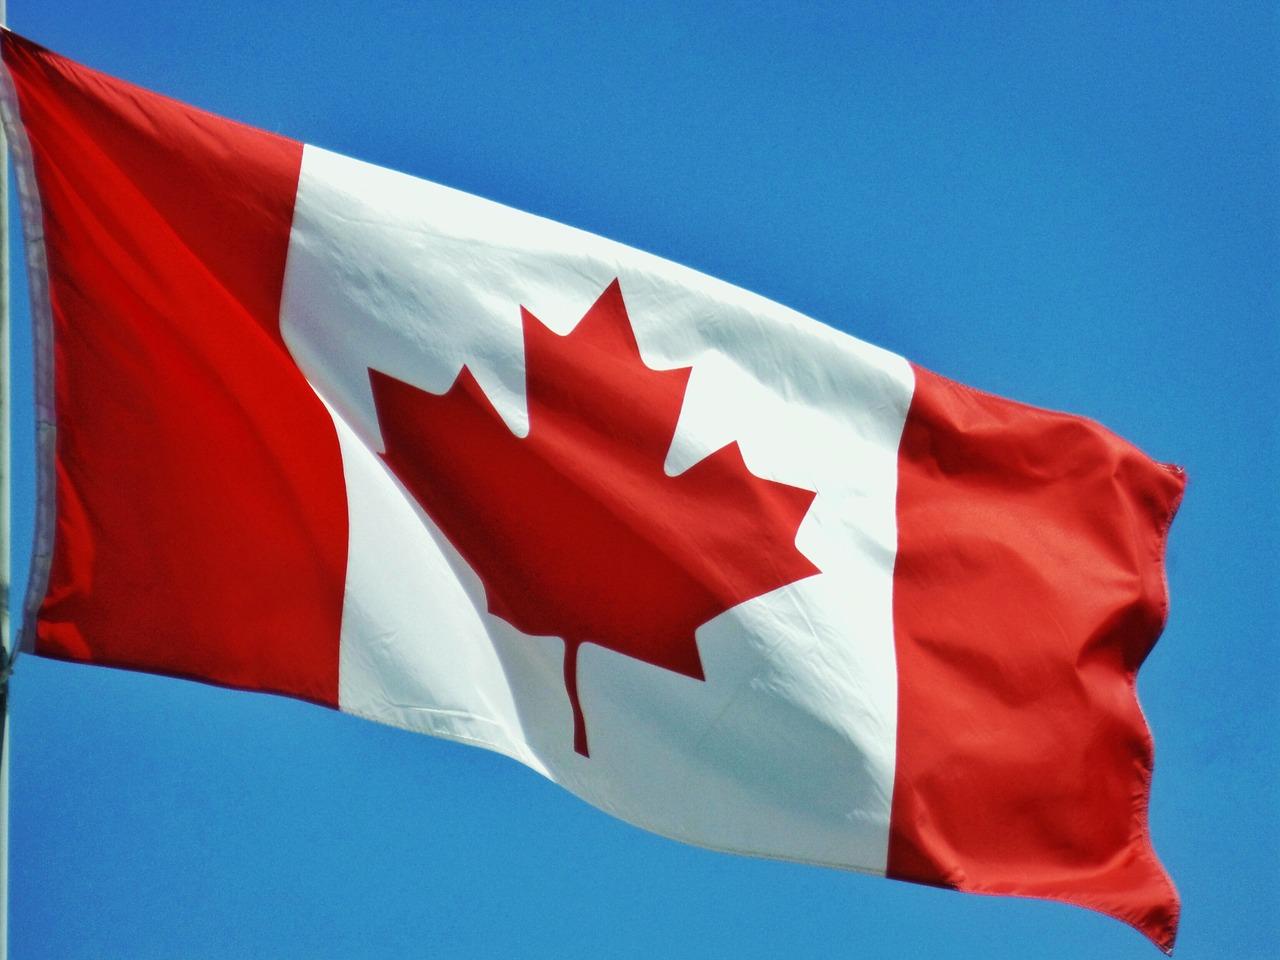 Image of Canadian flag by Jose Miguels from Pixabay